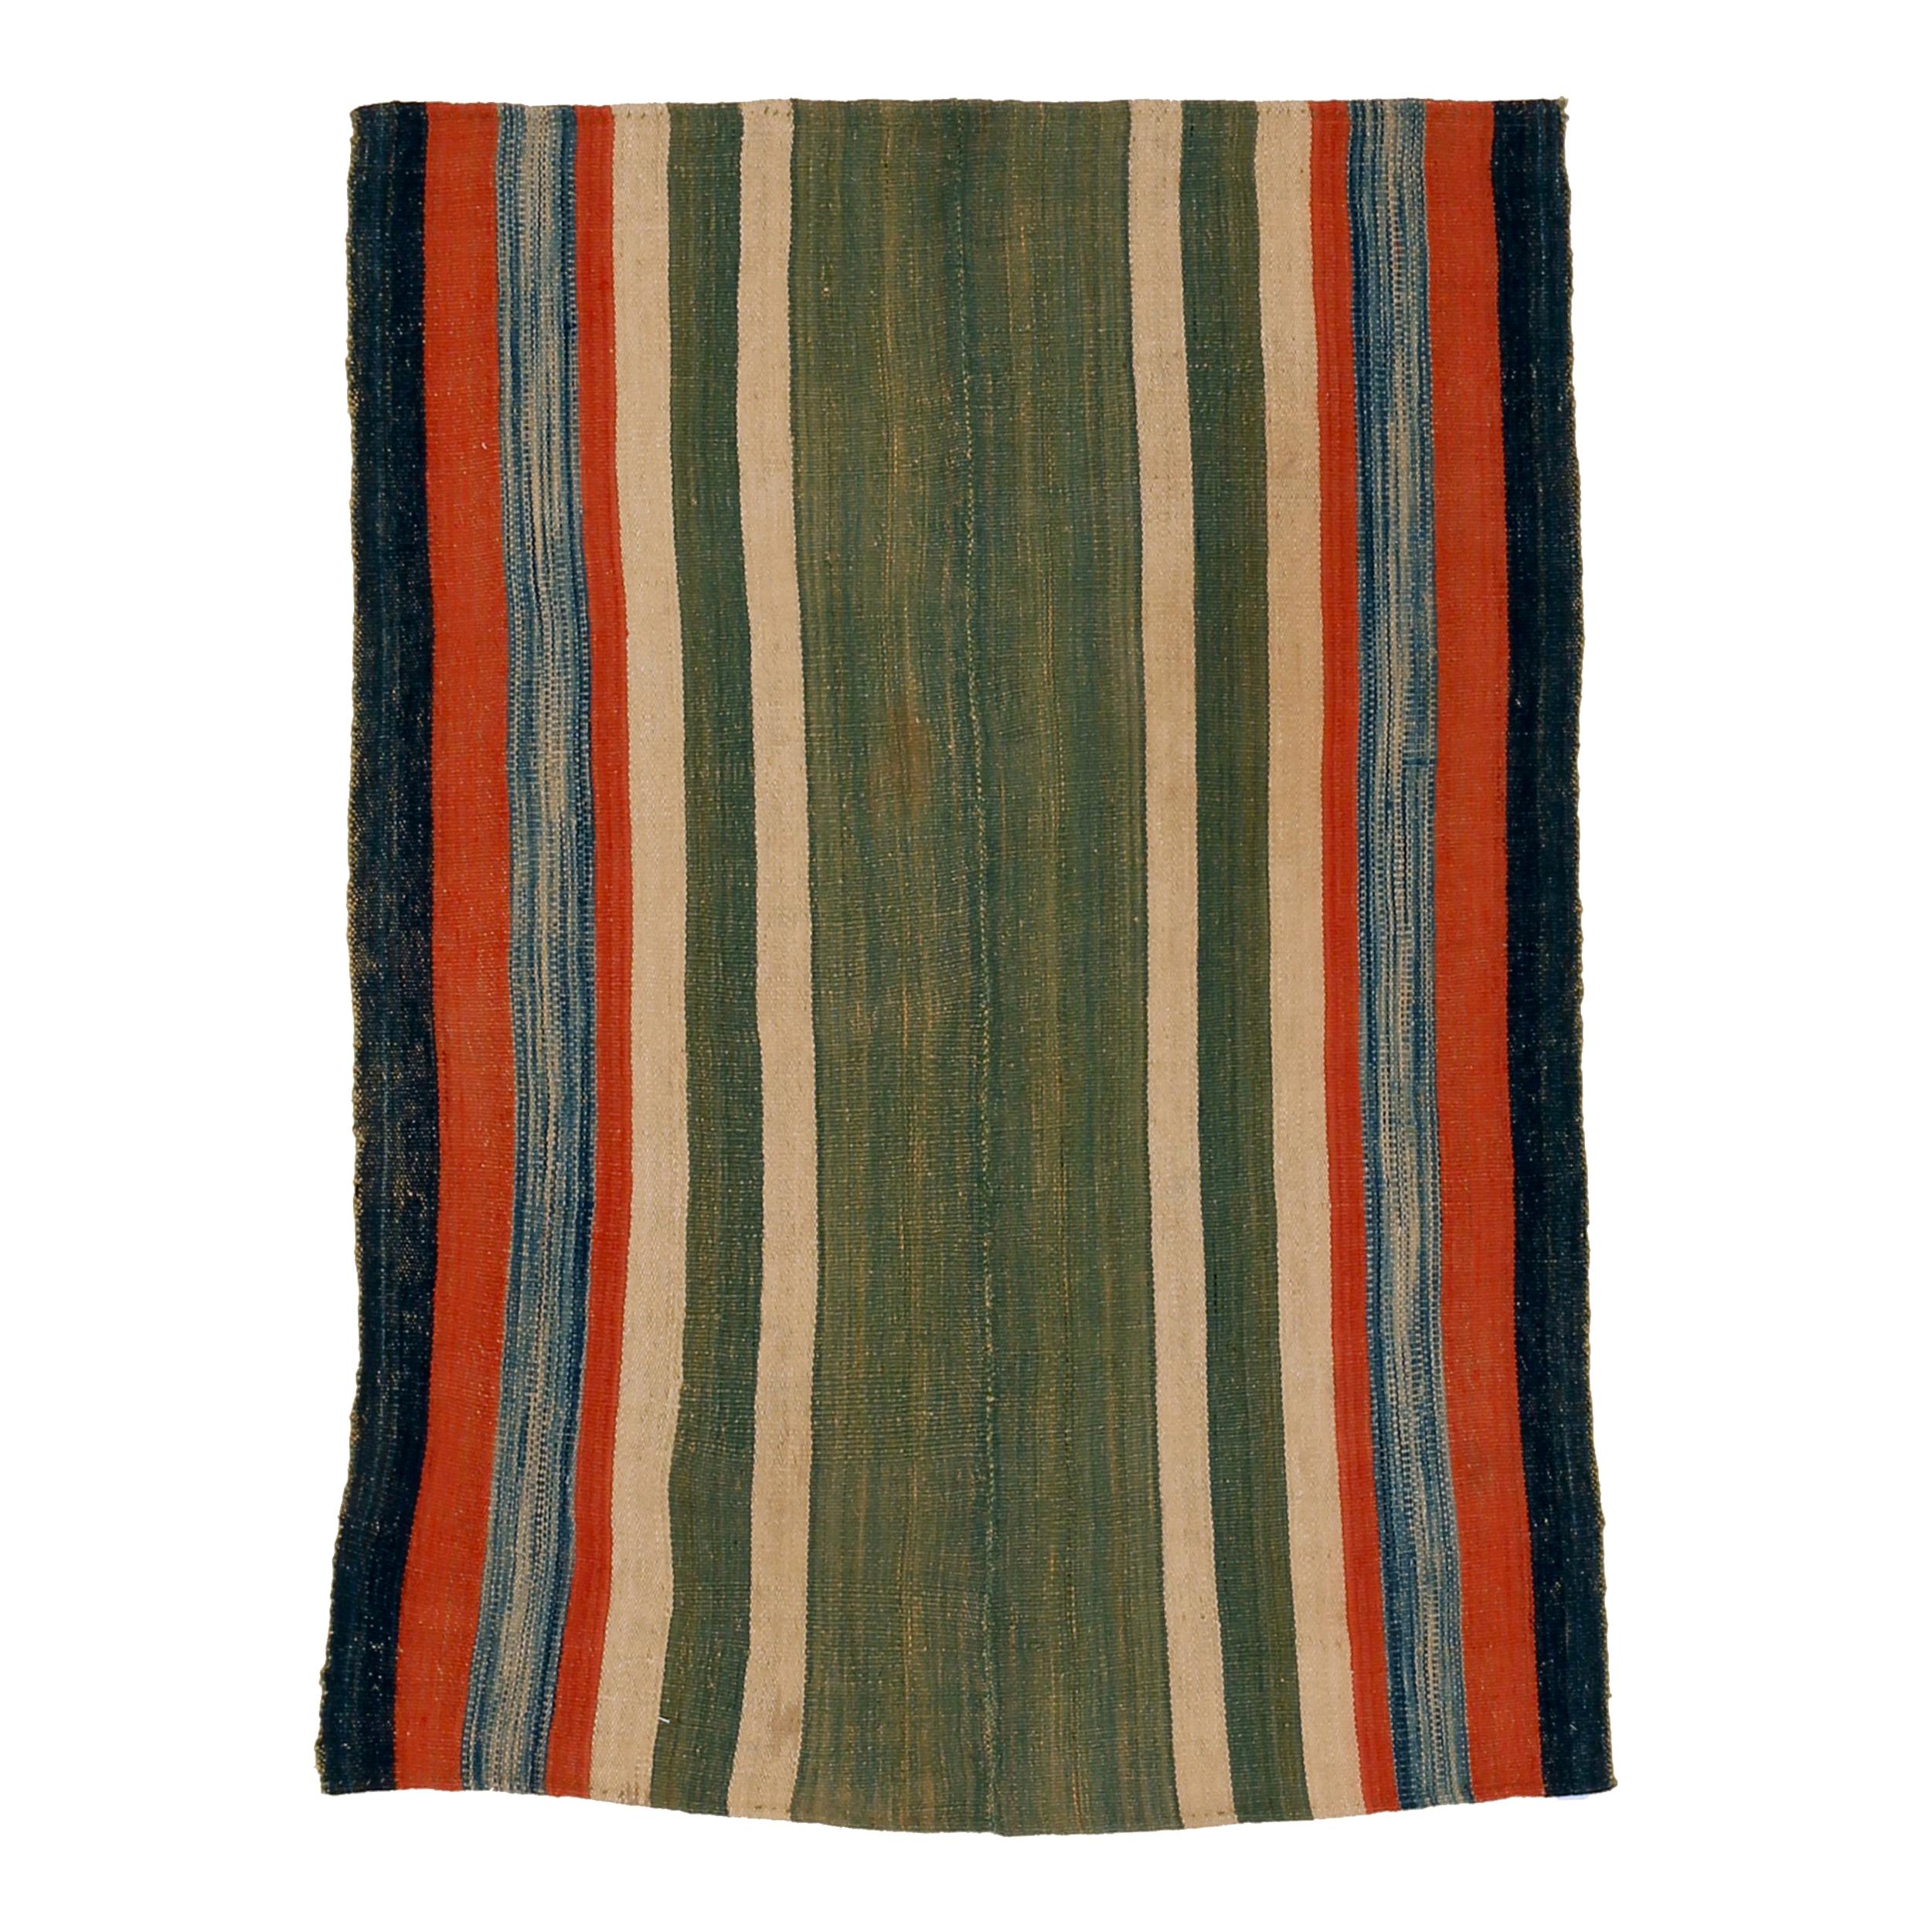 Antique Tribal Jajim Rug with Vertical Polychrome Stripes on a Green Ground